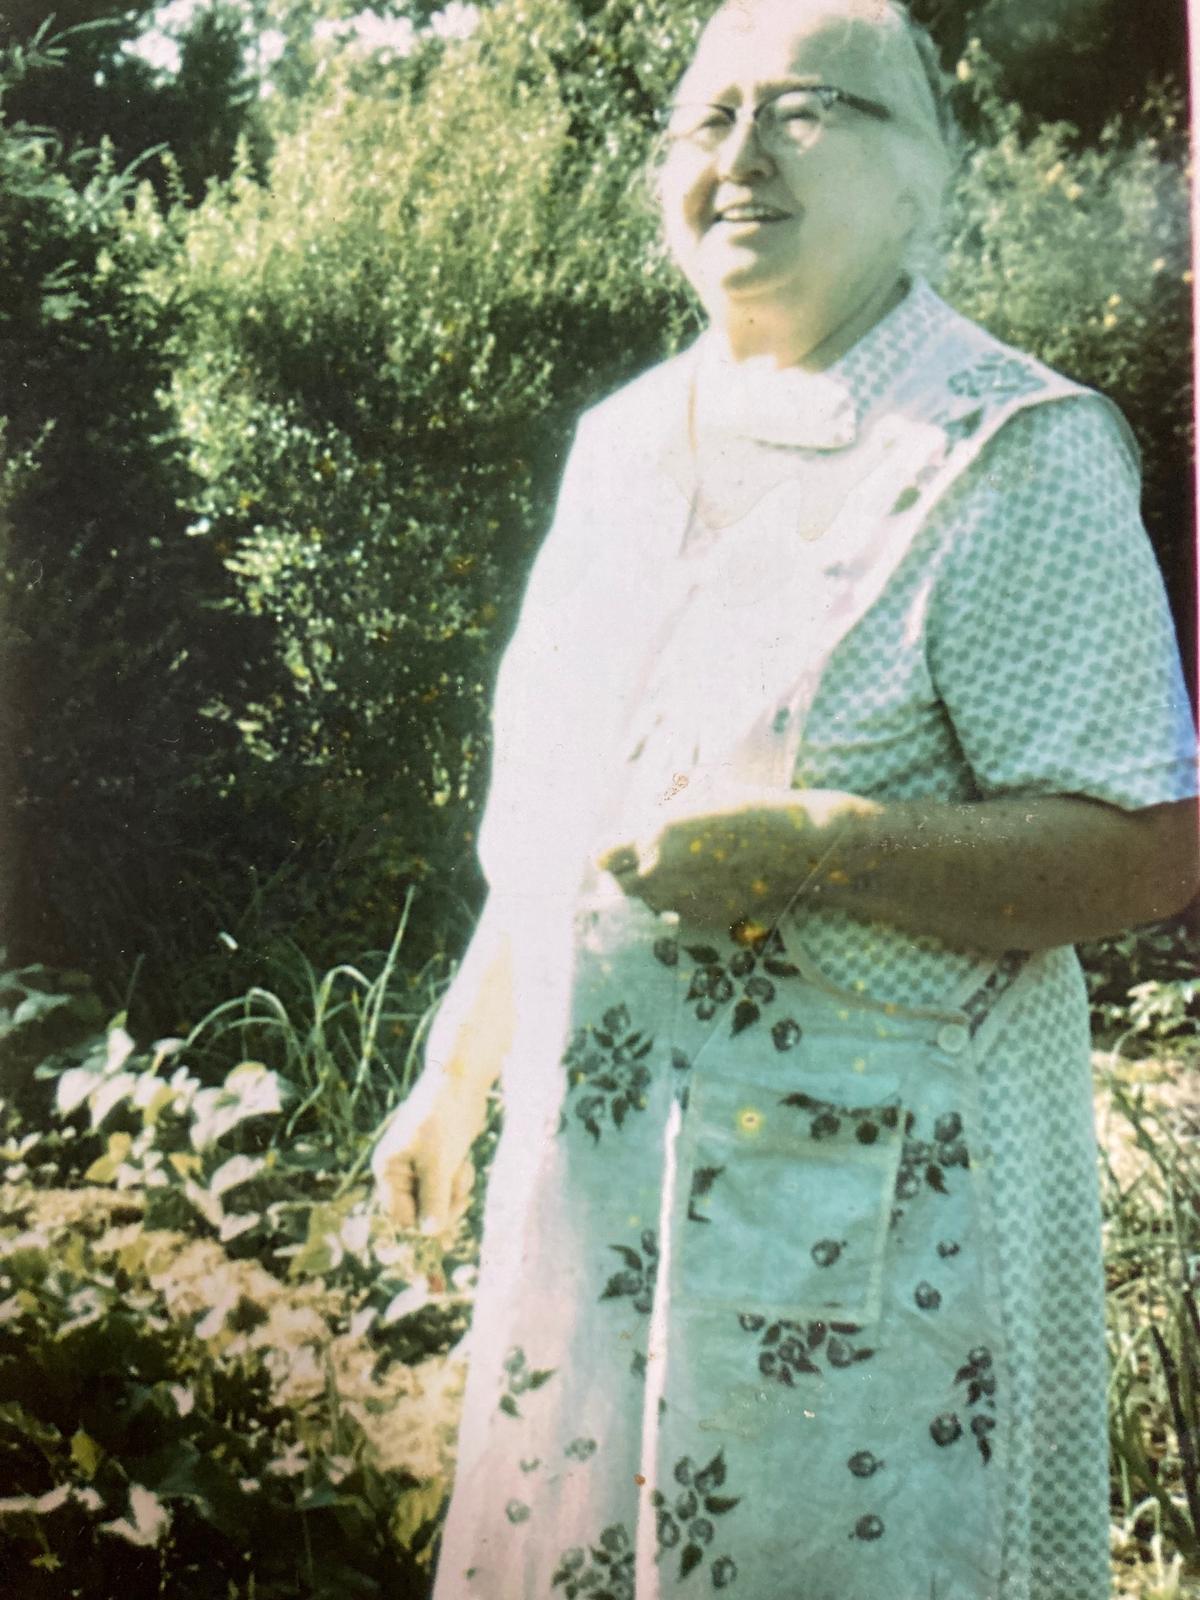 Grossmutter Rose in her garden, with her ubiquitous apron, in 1965. (Courtesy of E. M. McCreight)